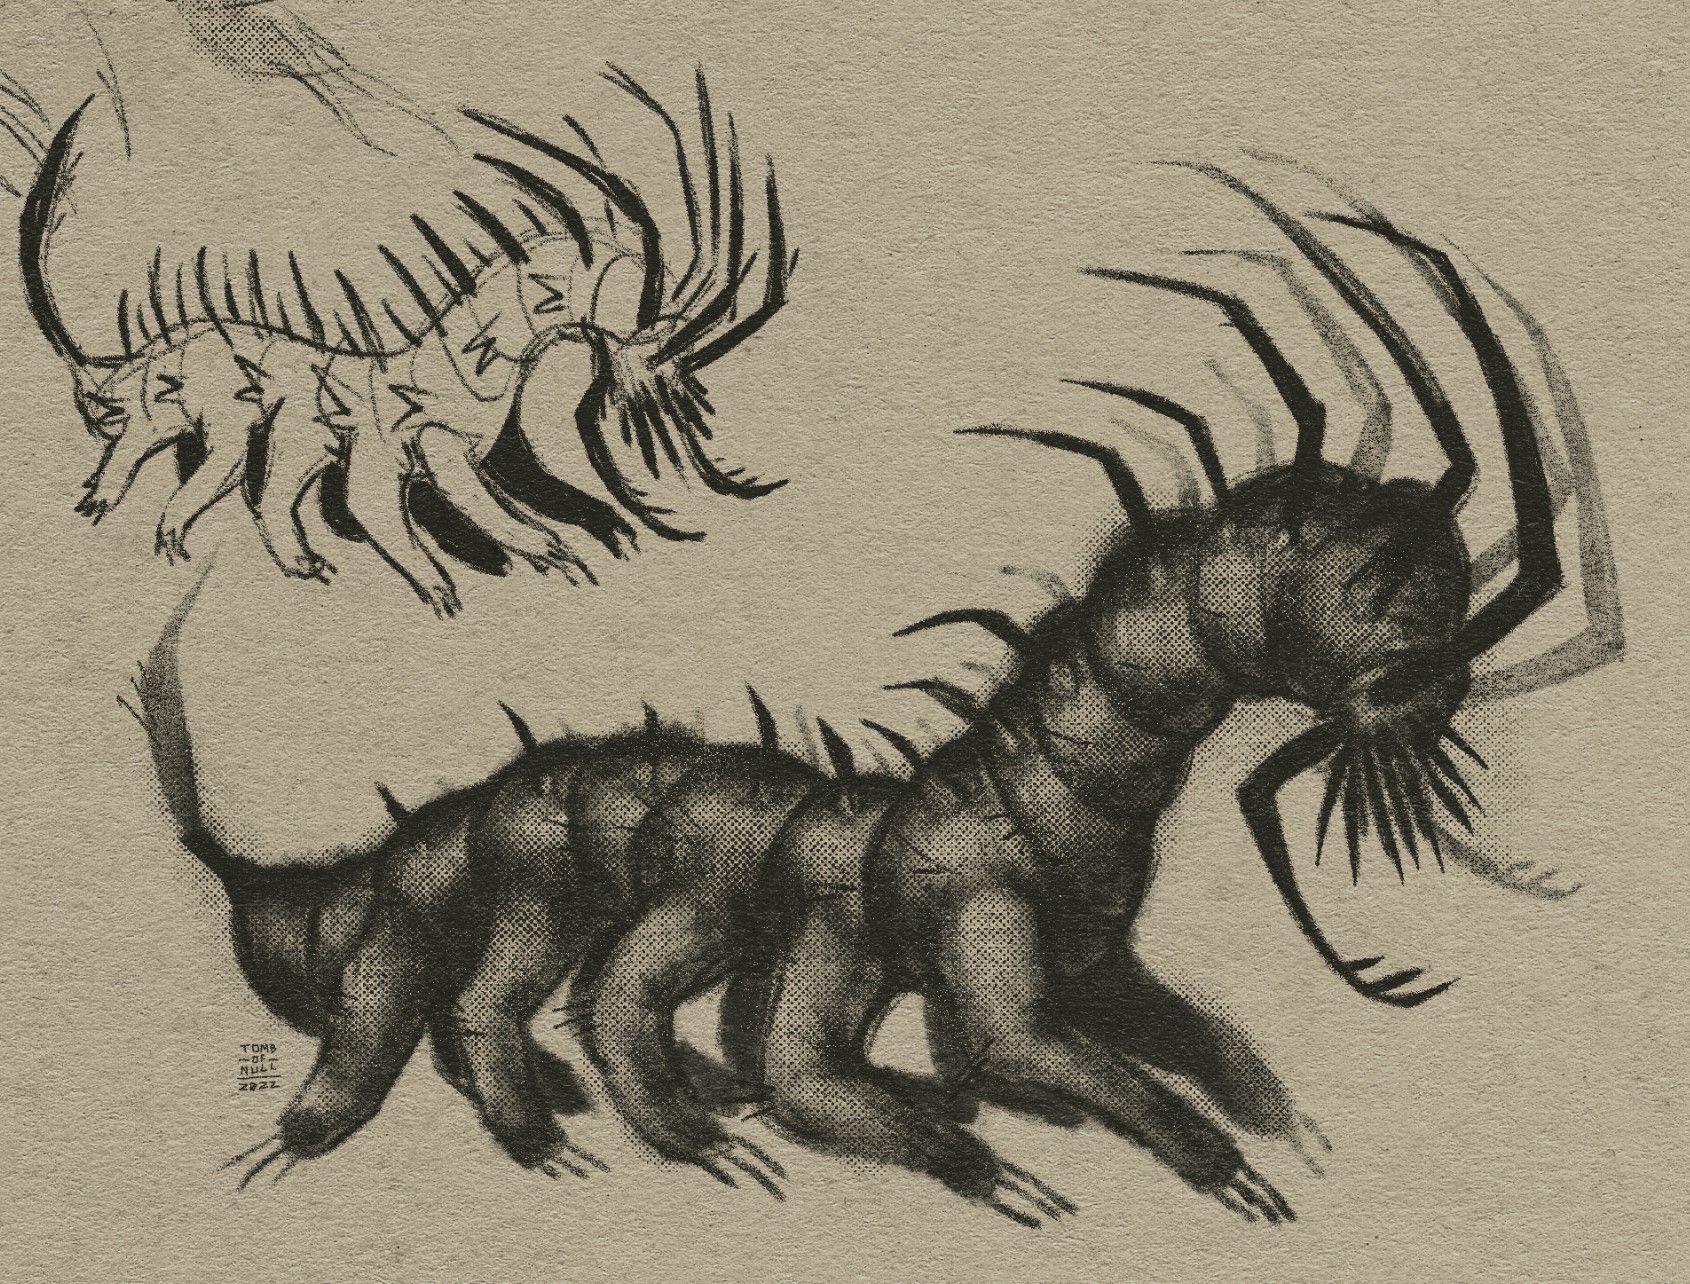 A couple of sketches of the same caterpillar beast but in profile.
